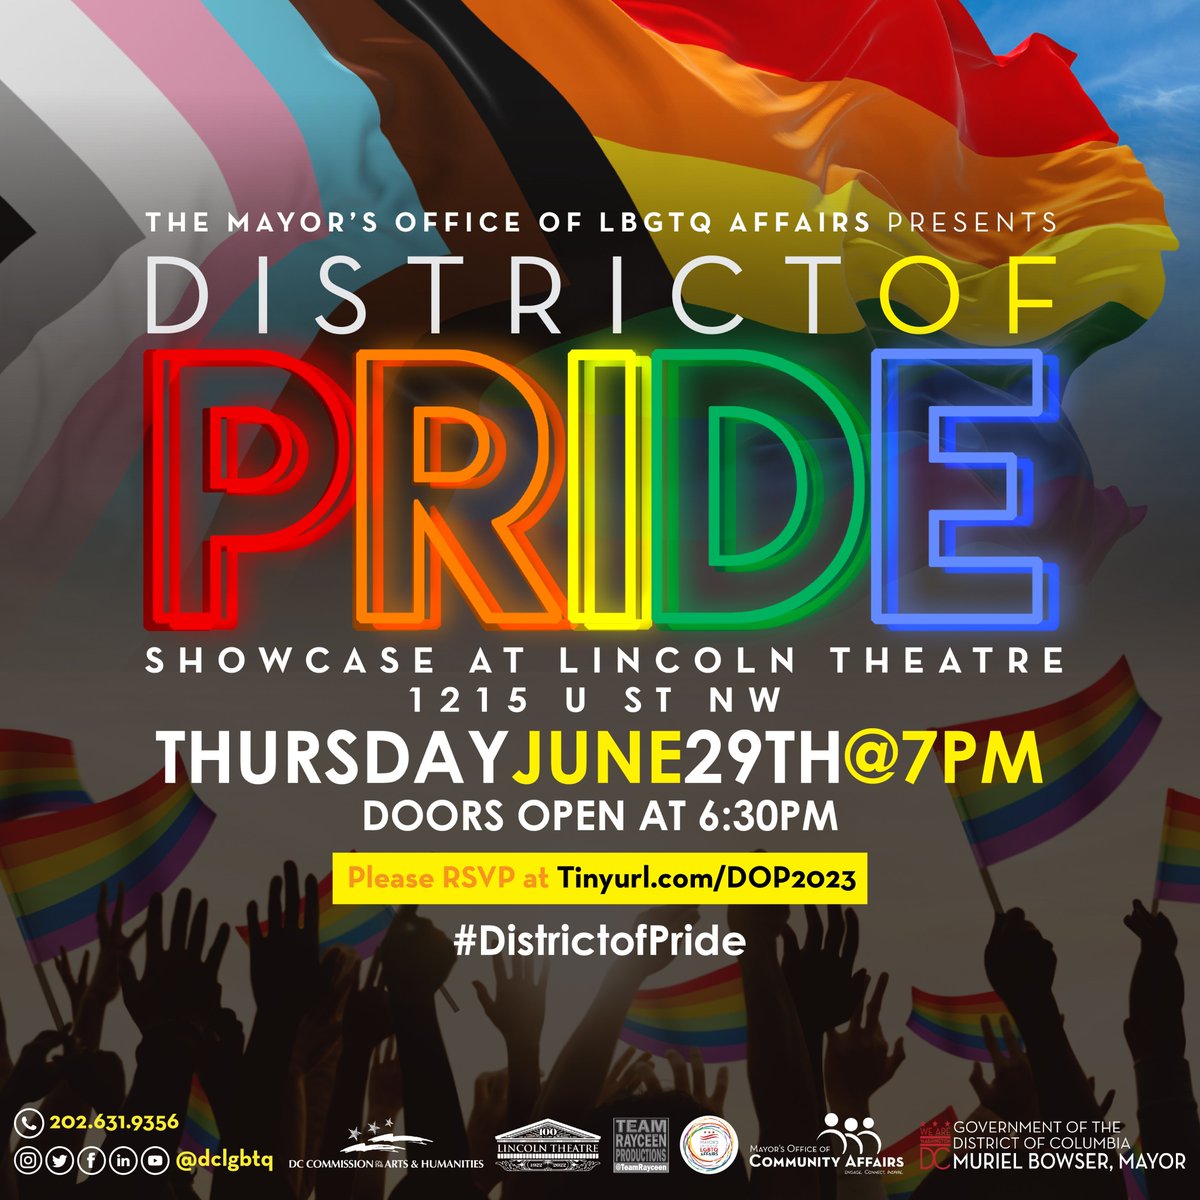 Join @DCLGBTQ and @TeamRayceen for #DistrictofPride in Washington, DC.
Venue: @TheLincolnDC on U Street NW
Date: Thursday, June 29, 2023
Doors: 6:30pm
Program: 7pm
Featuring live music and more
#DOP2023 is free and open to the public!
Register at Rayceen.com